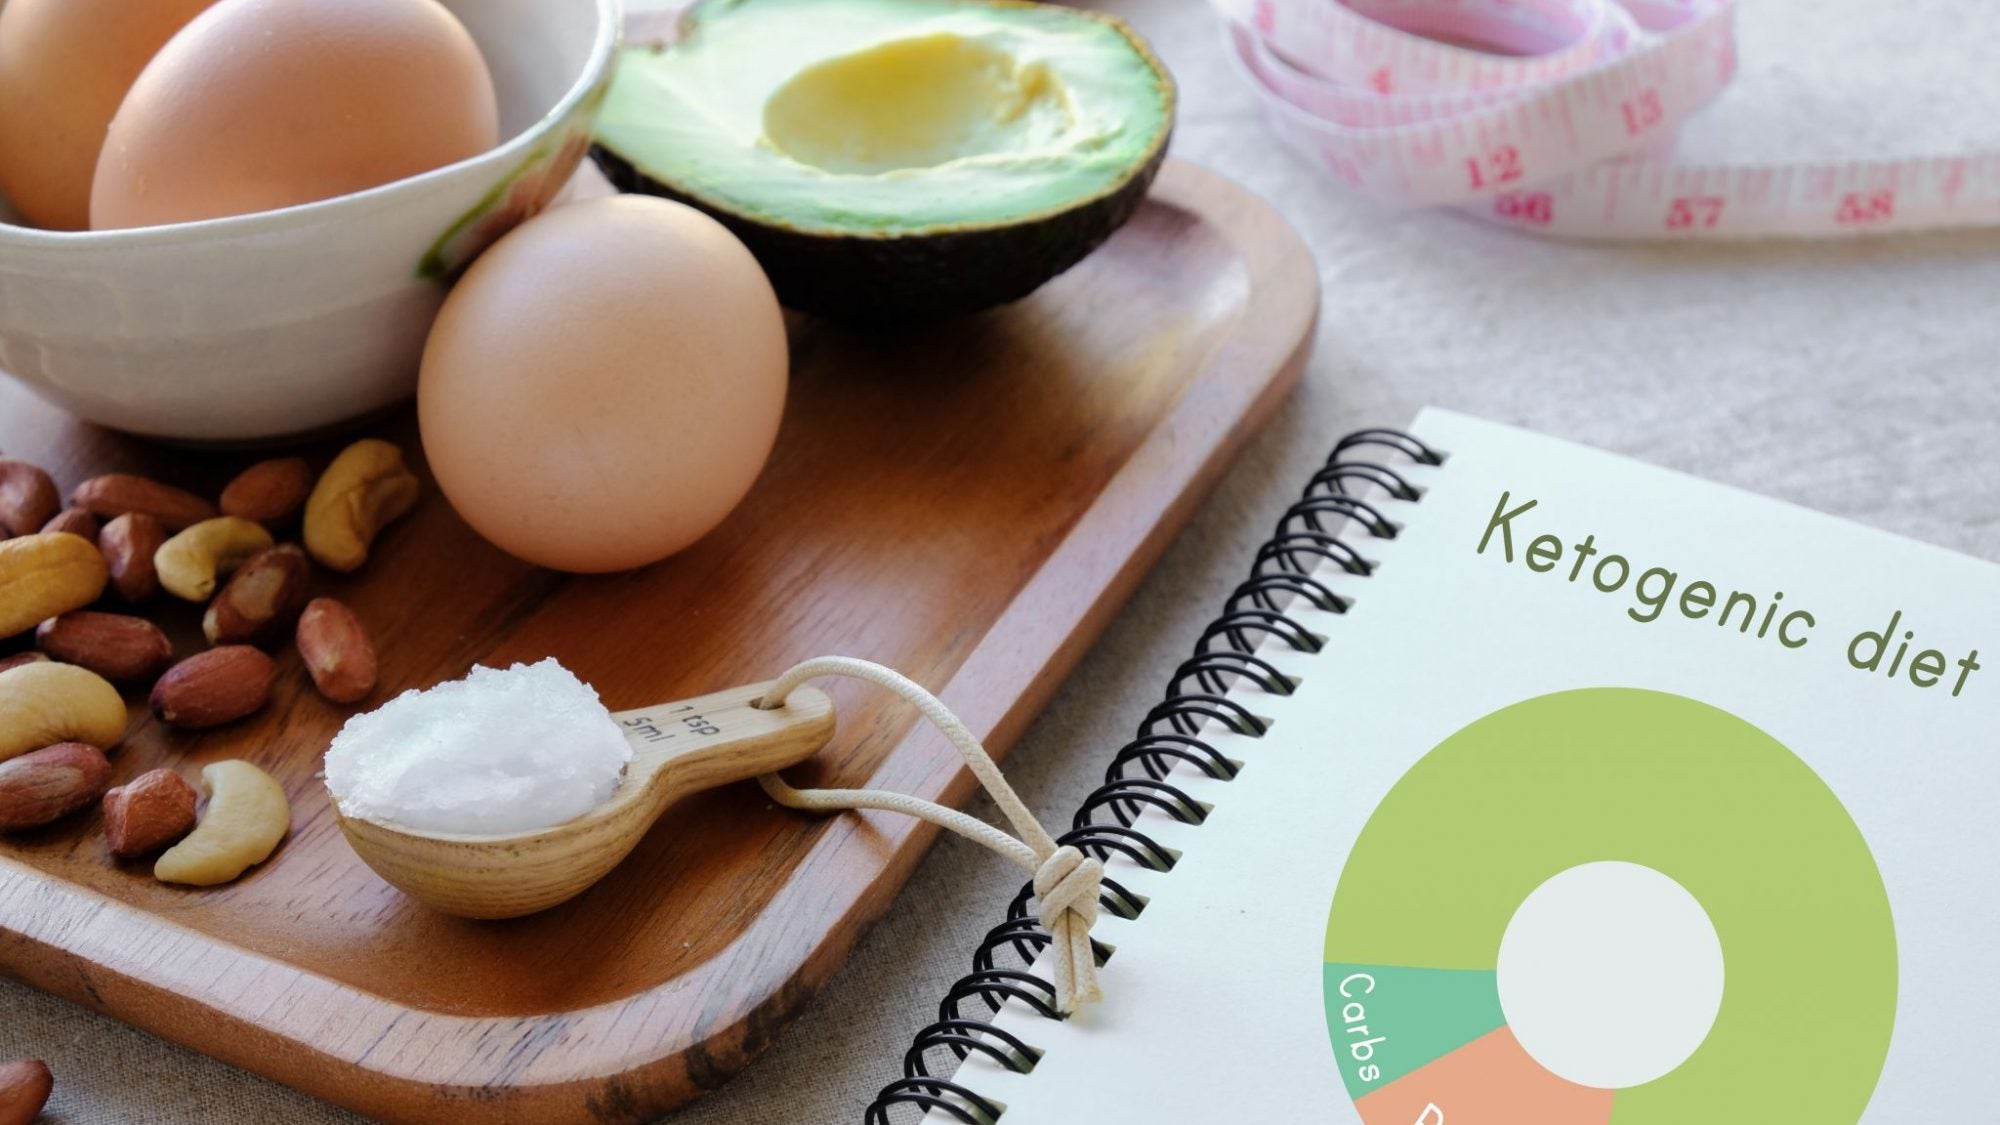 How To Get Into Ketosis The Right Way